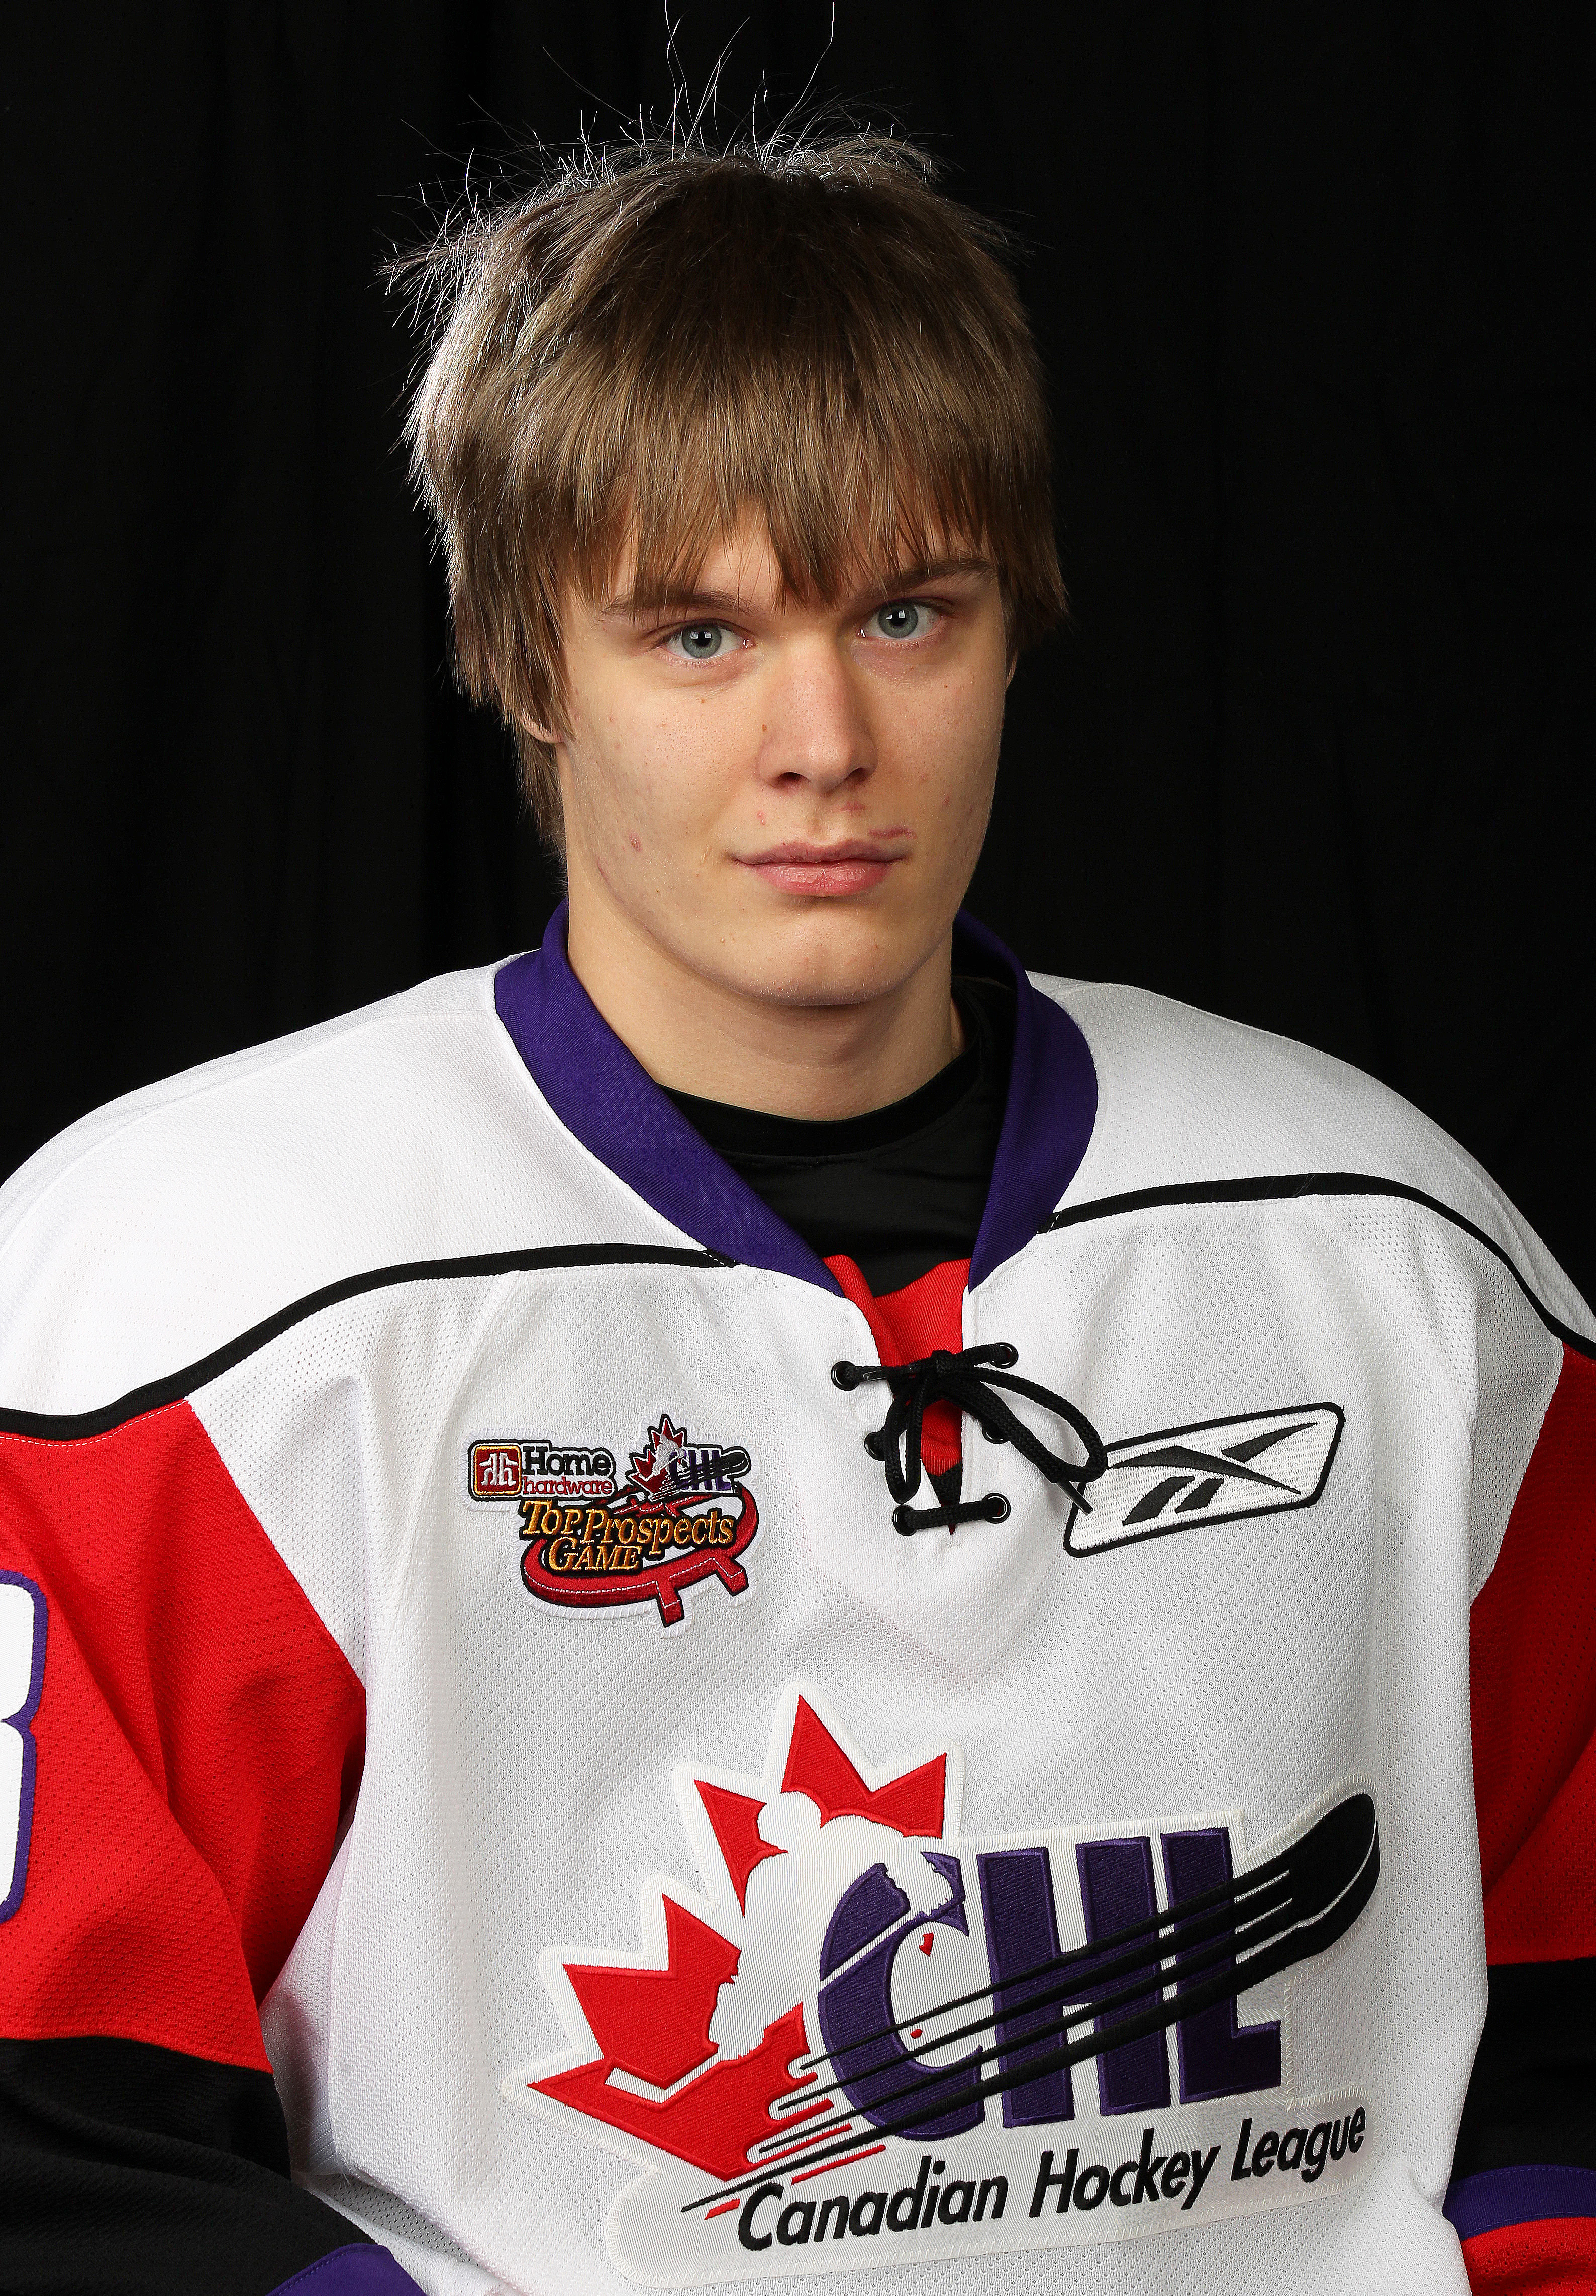 TORONTO, CAN - JANUARY 19:  Vladislav Namestnikov #18 of Team Orr poses for a Head Shot prior to skating in the 2011 Home Hardware Top Prospects game on January 19, 2011 at the Air Canada Centre in Toronto, Canada. (Photo by Claus Andersen/Getty Images)